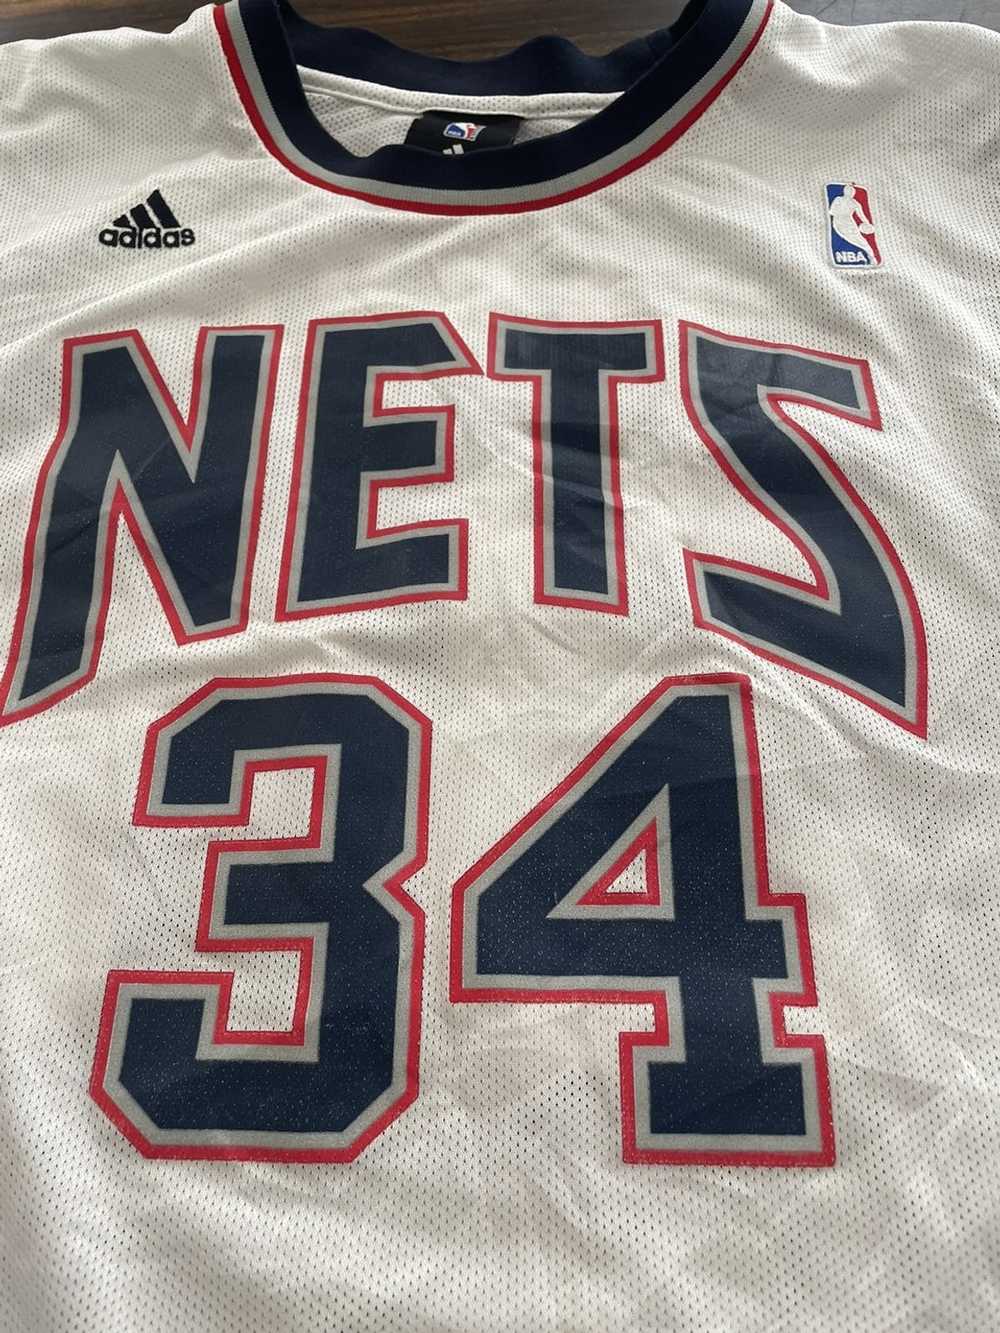 VINTAGE 90s New Jersey Nets Satin Jacket Size XXL NBA Blue Red Basketball.  Measures 31” pit to pit 22” pit to sleeve cuff and 30” top of shoulder to  for Sale in